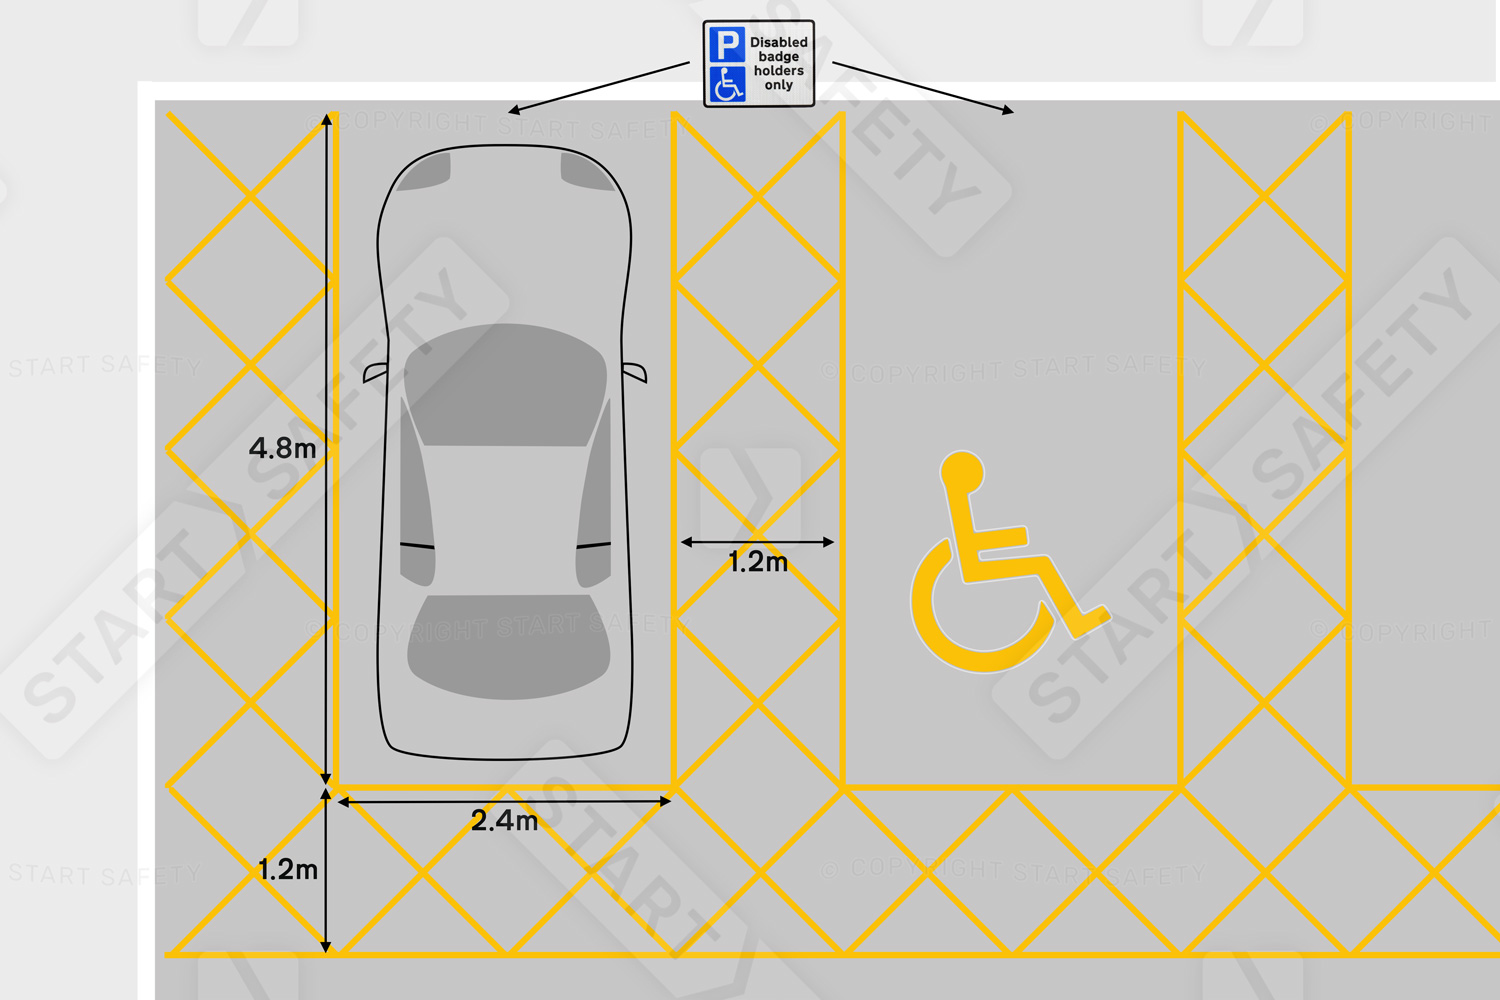 setting out disabled parking bays